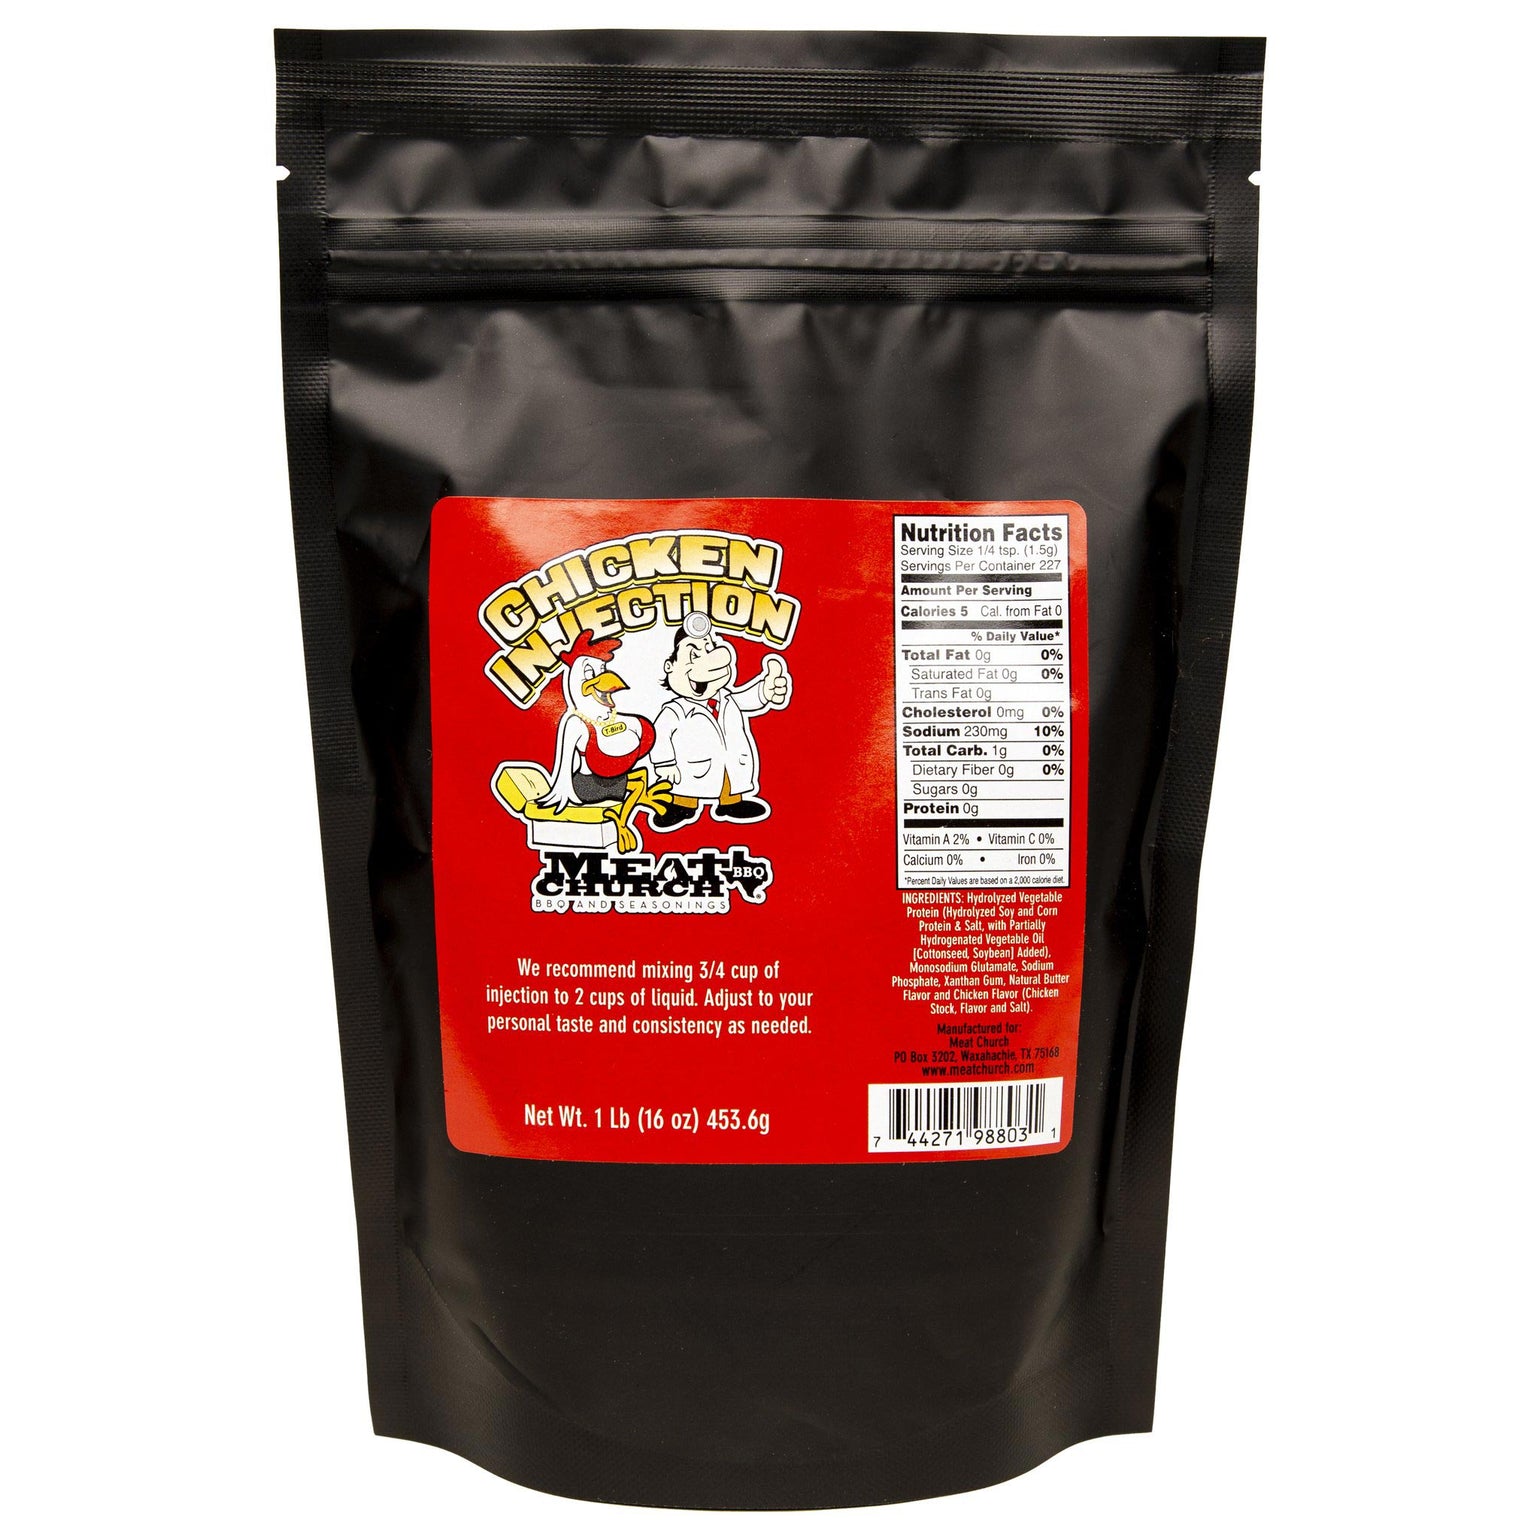 Meat Church T-Bird's Chicken Injection 1lb Bag